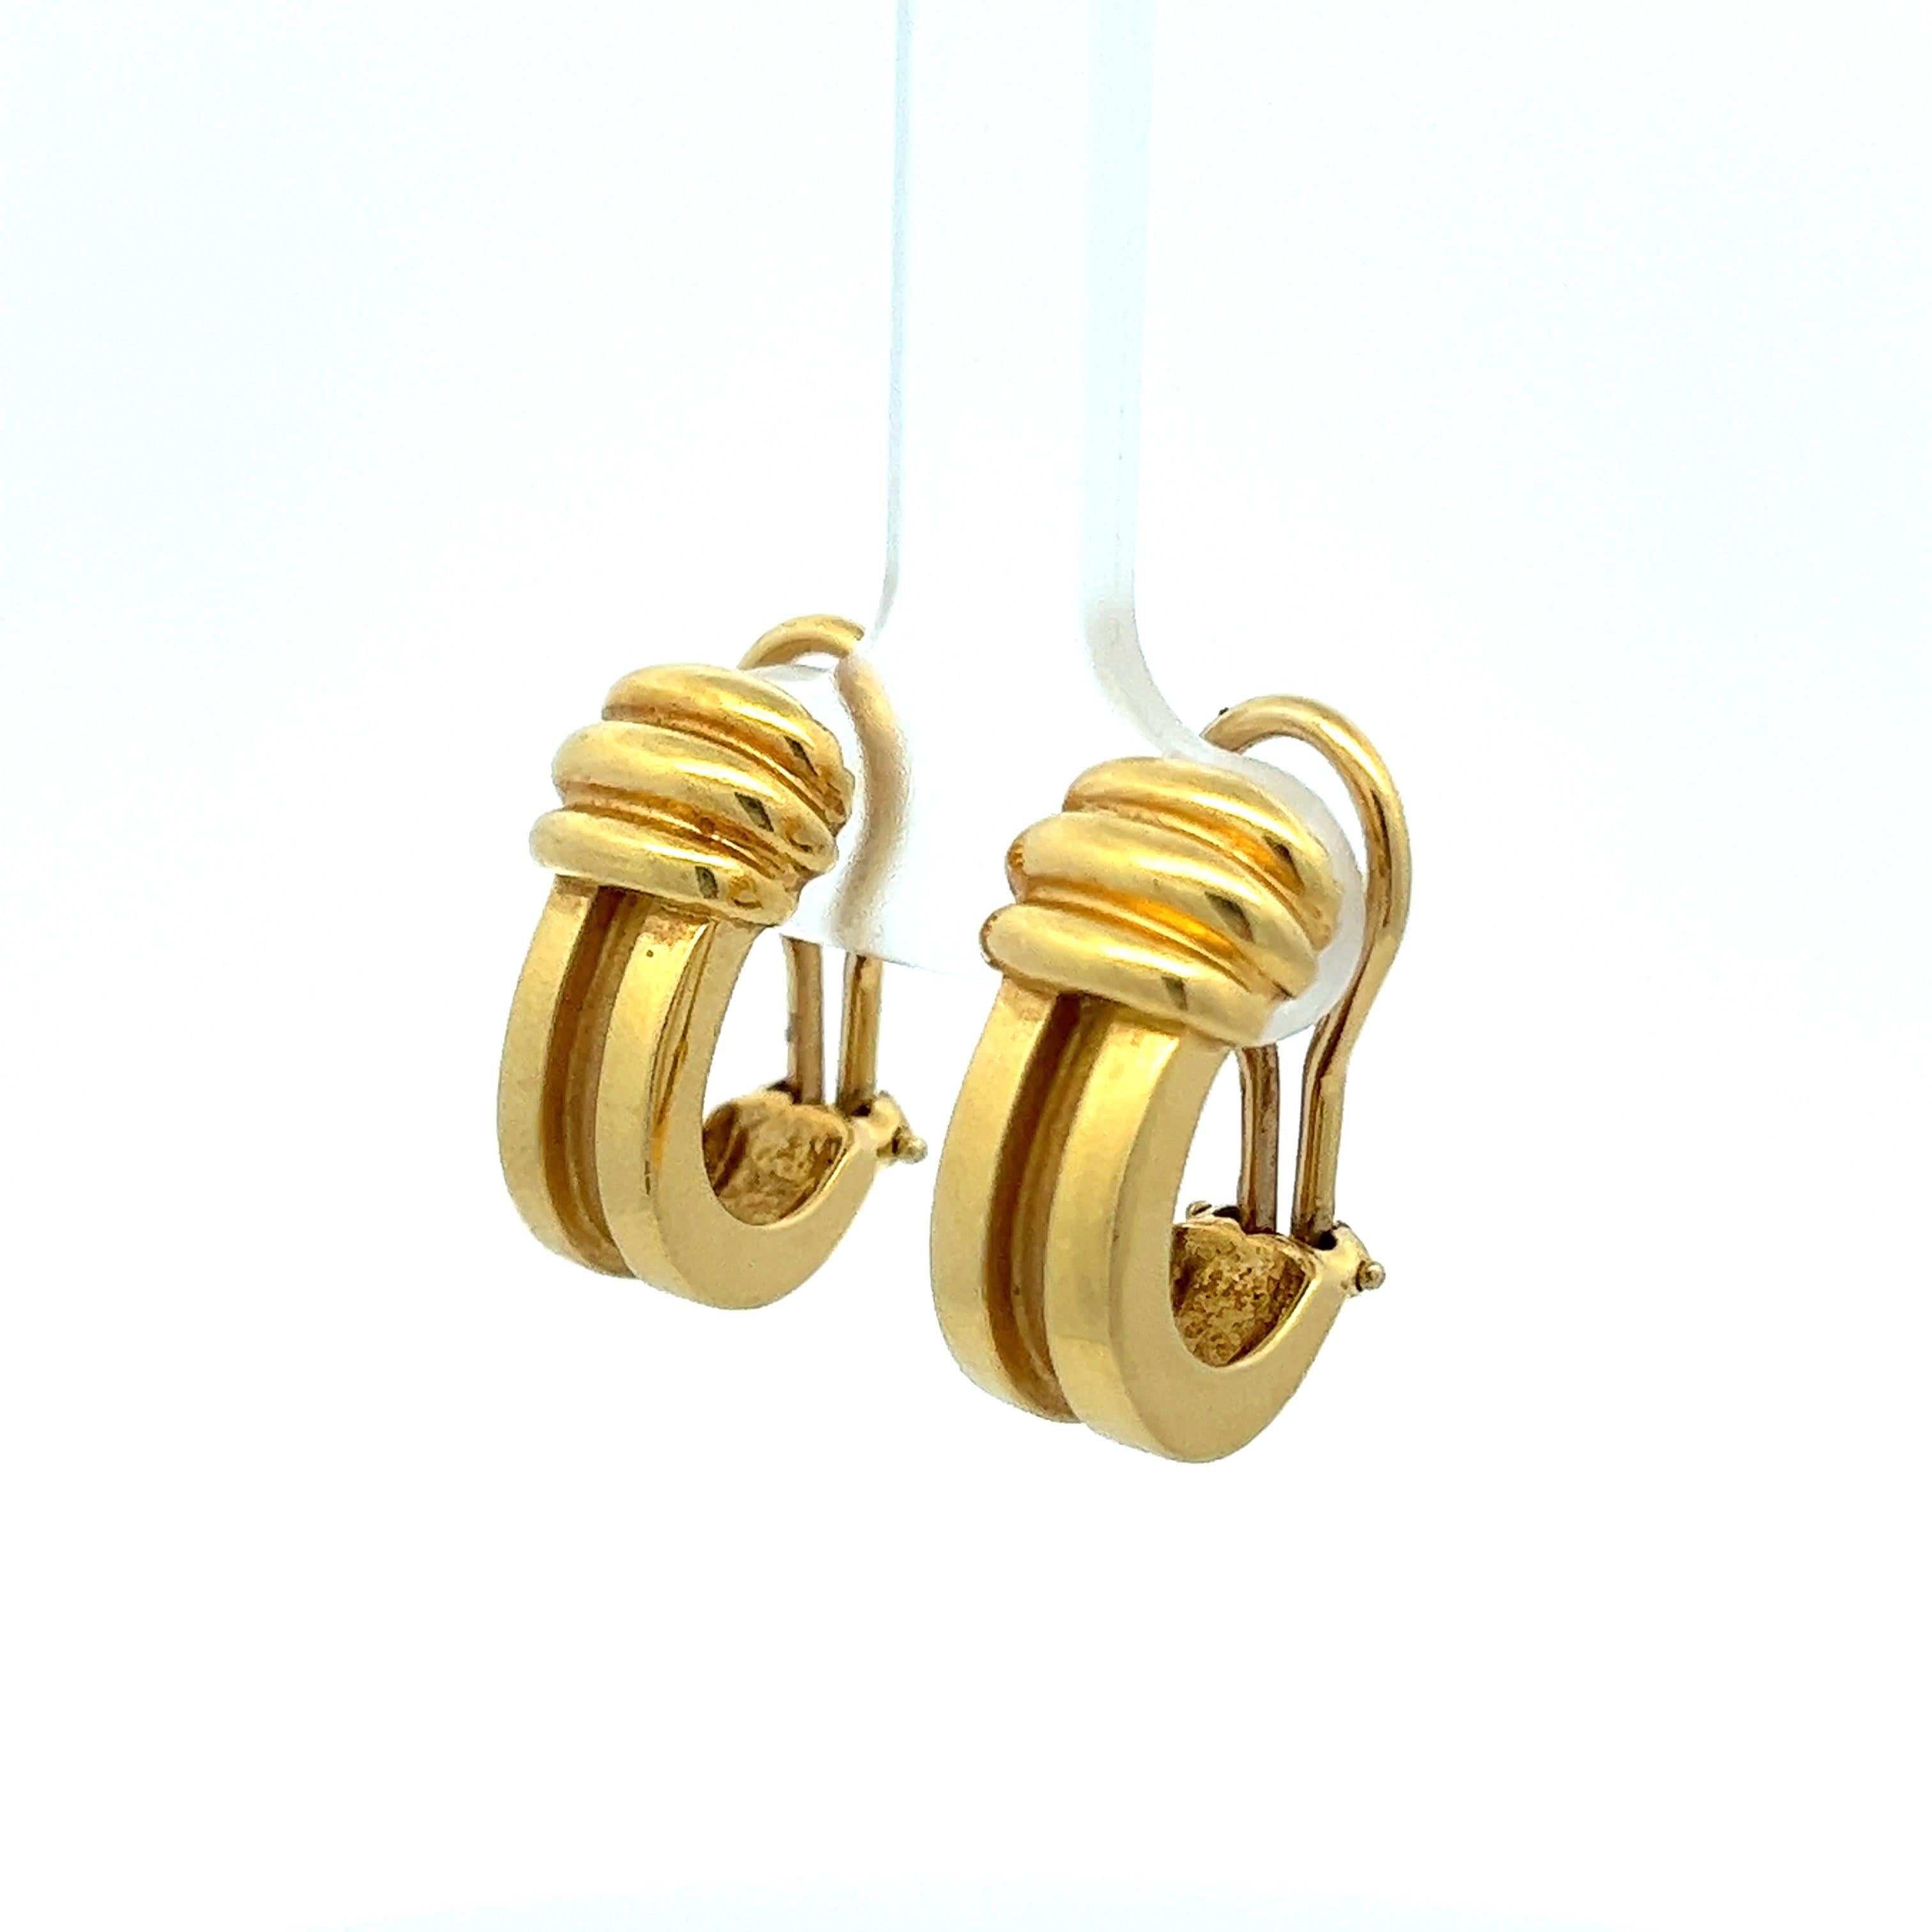 These 18 karat yellow gold clip-on huggie earrings hail from Tiffany & Co.'s esteemed Atlas collection, dating back to 1995. Characterized by the iconic numeral motifs, the Atlas collection draws inspiration from the Atlas clock that has adorned the